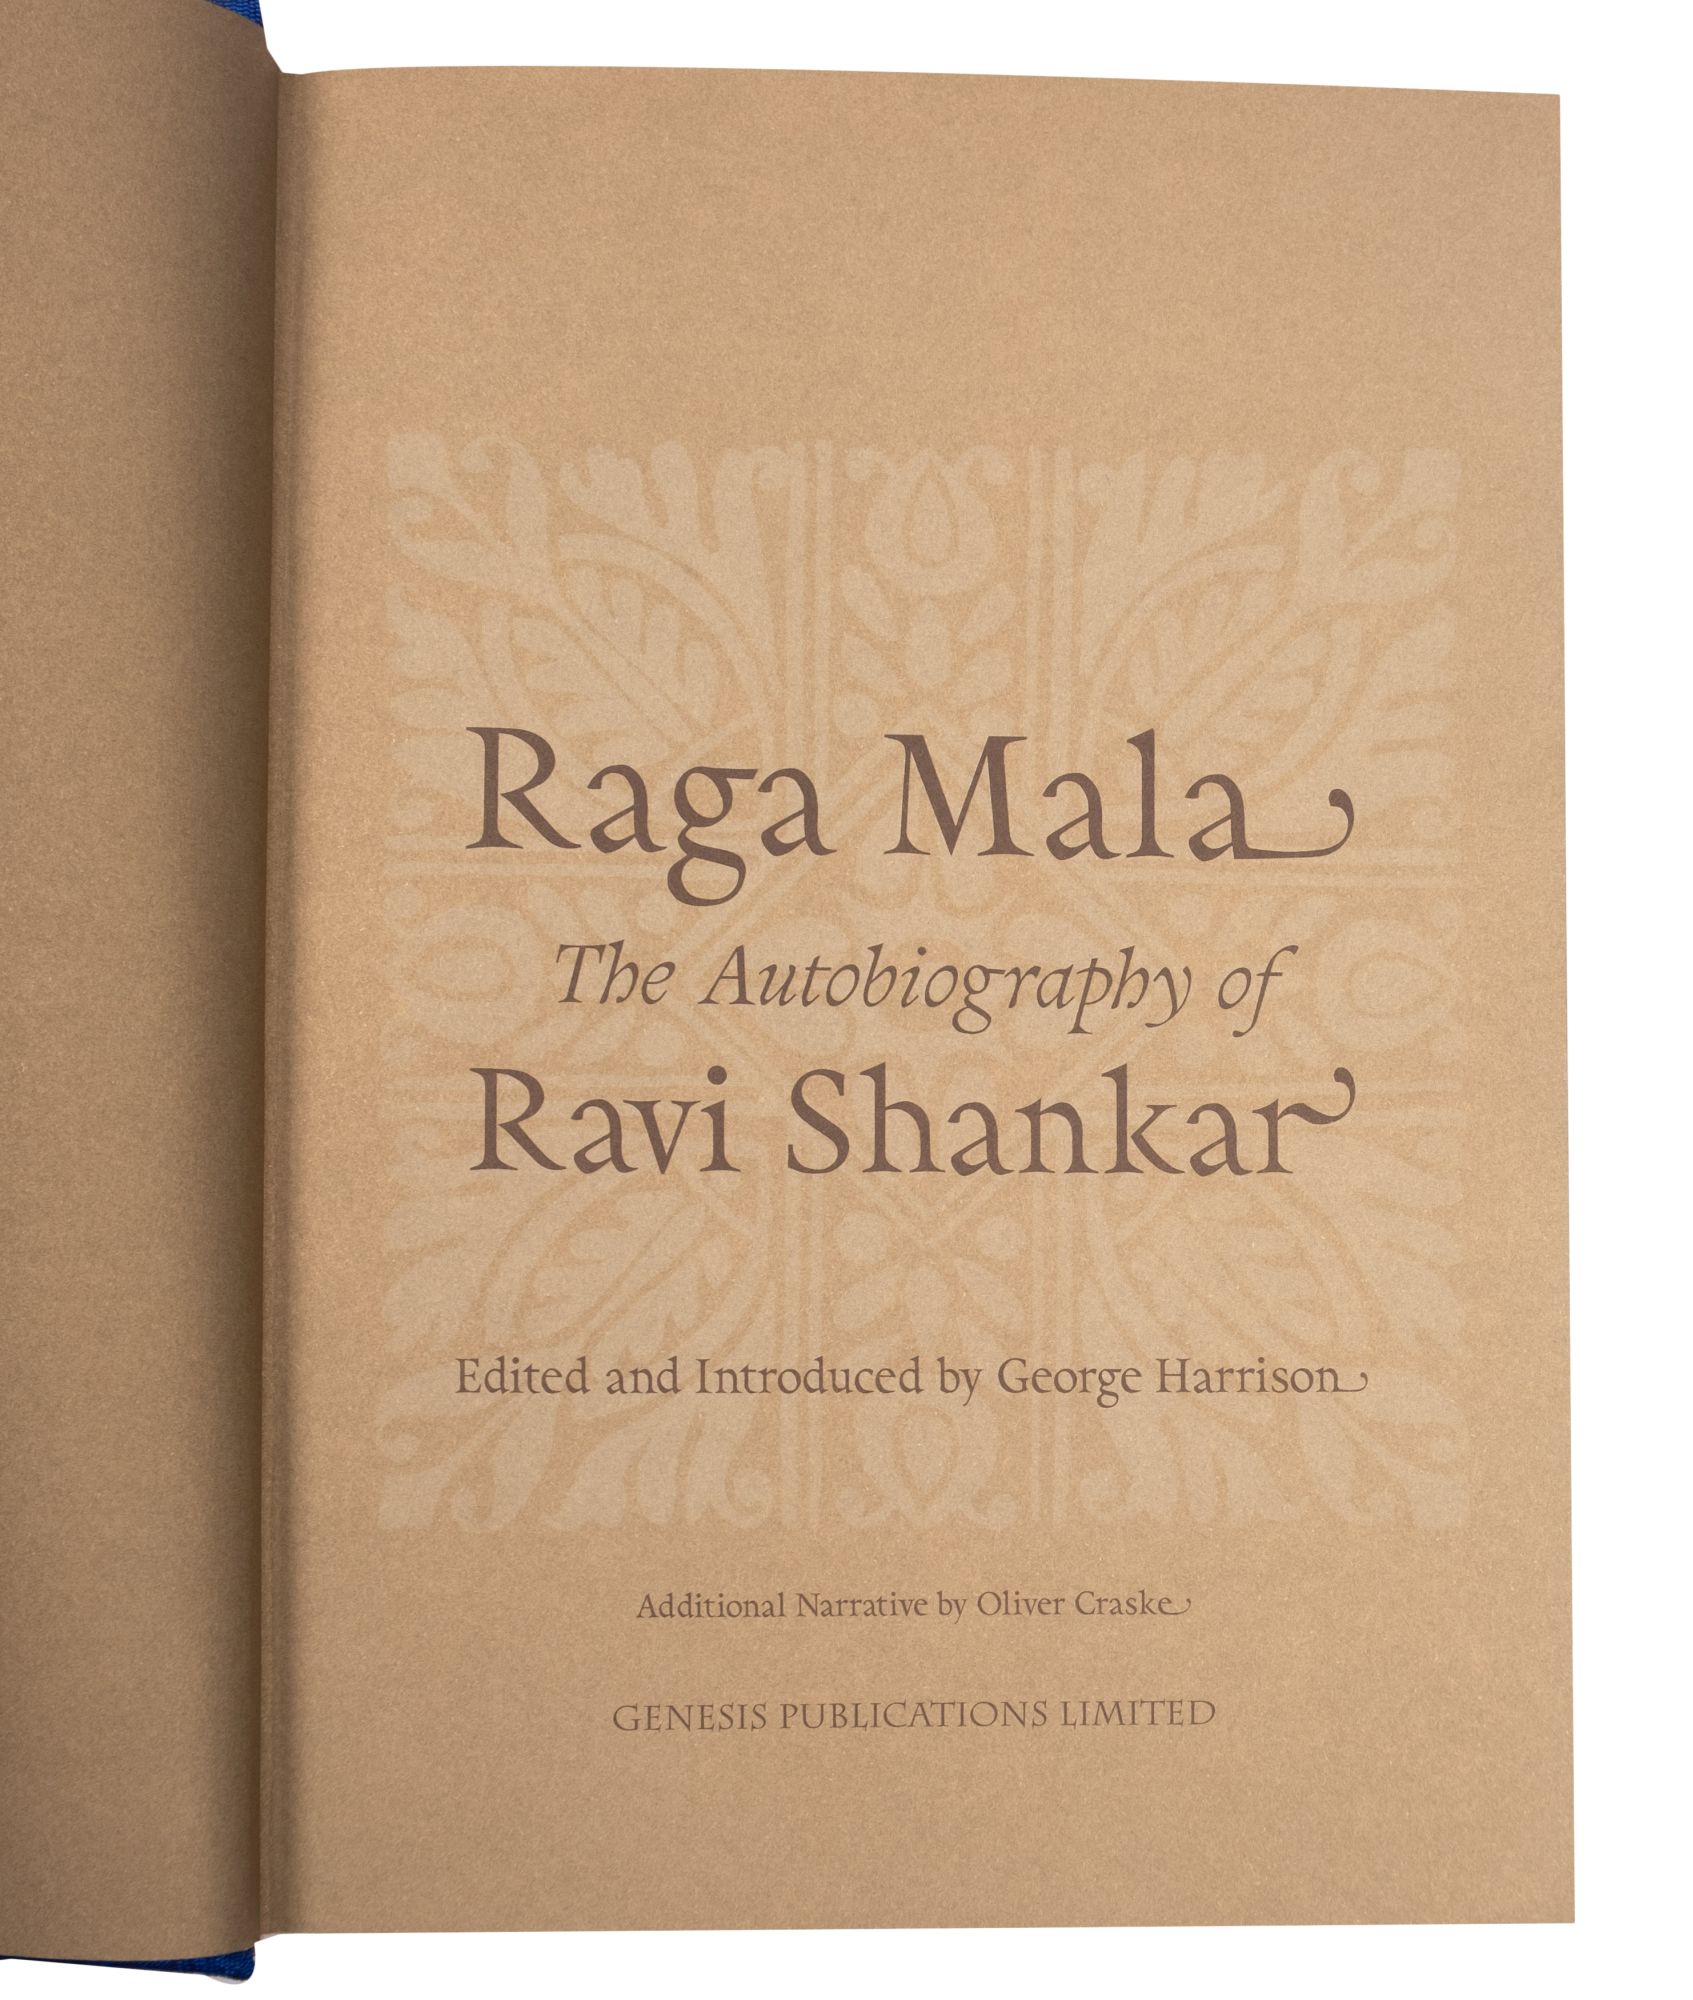 HARRISON, George, edited and introduced by Raga Mala, the autobiography of Ravi Shankar, - Image 4 of 4